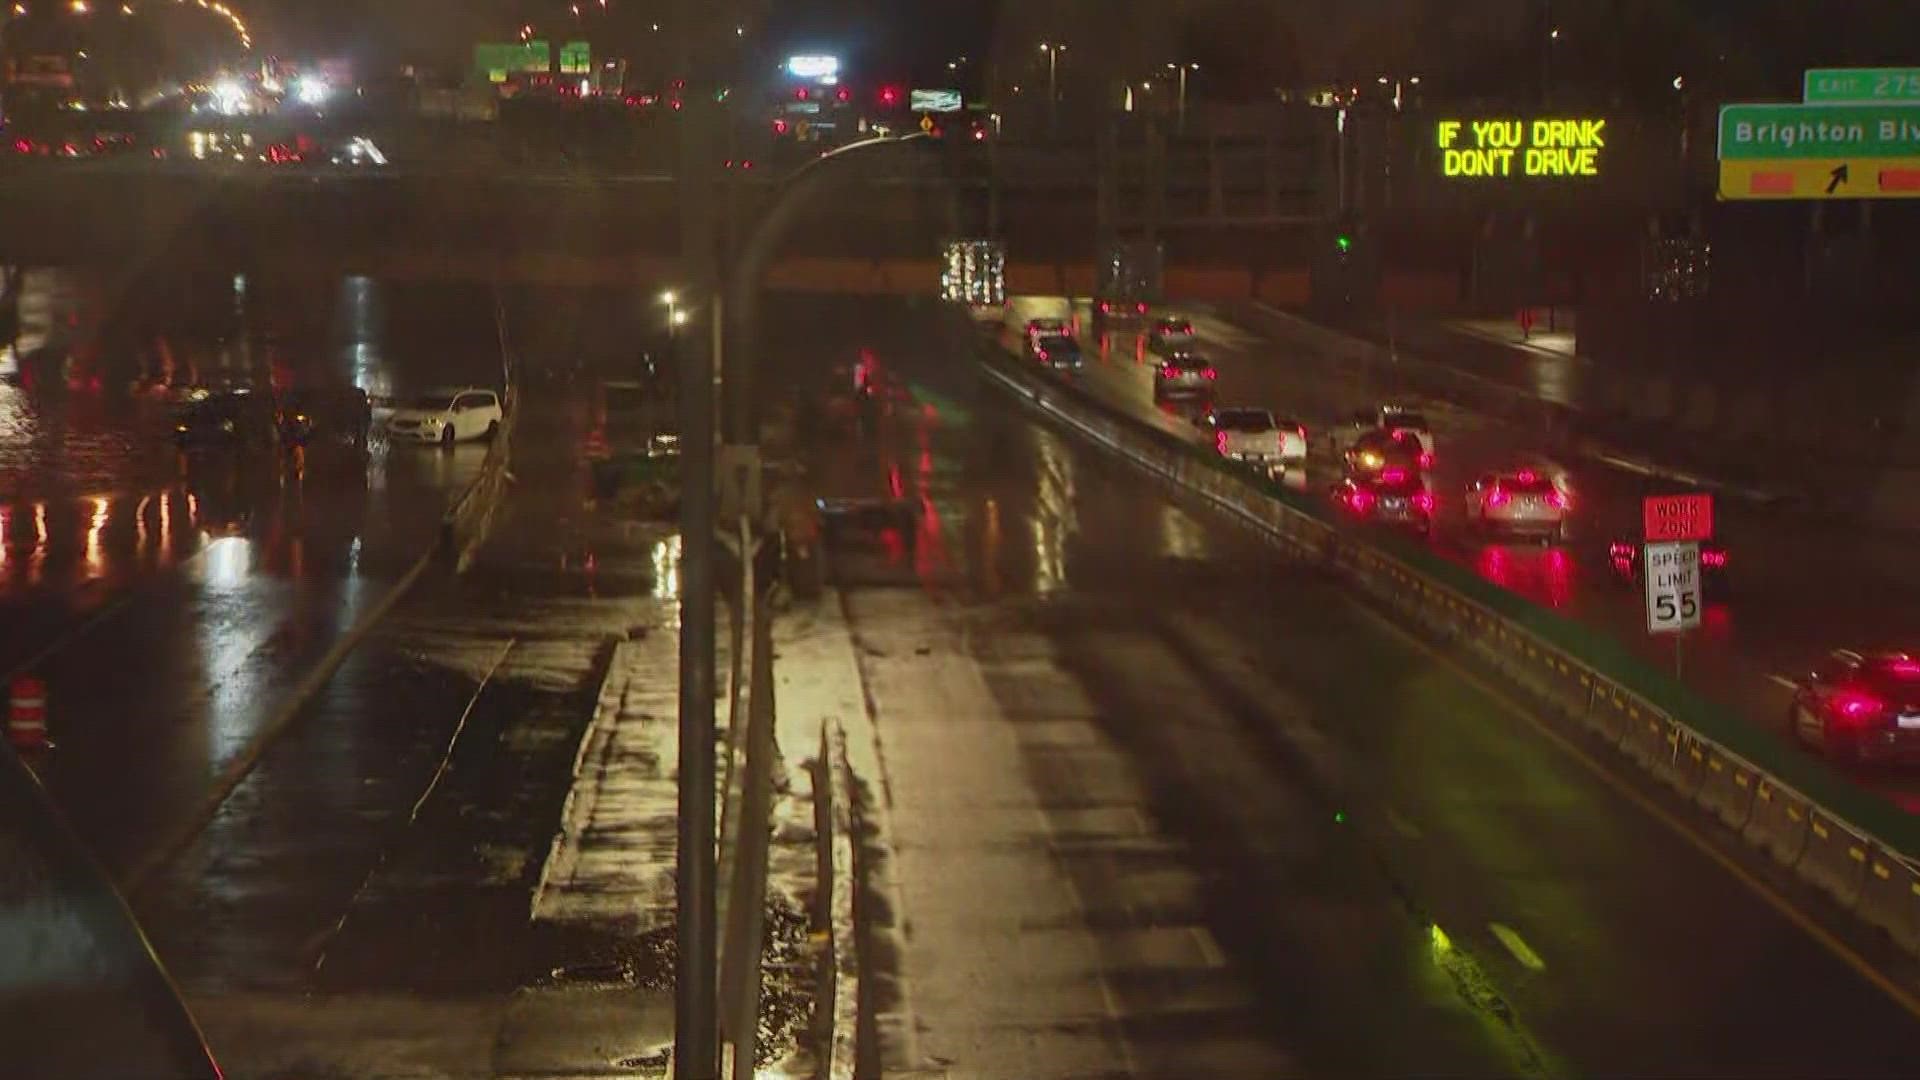 The Denver Fire Department said crews have rescued at least 19 people from vehicles.